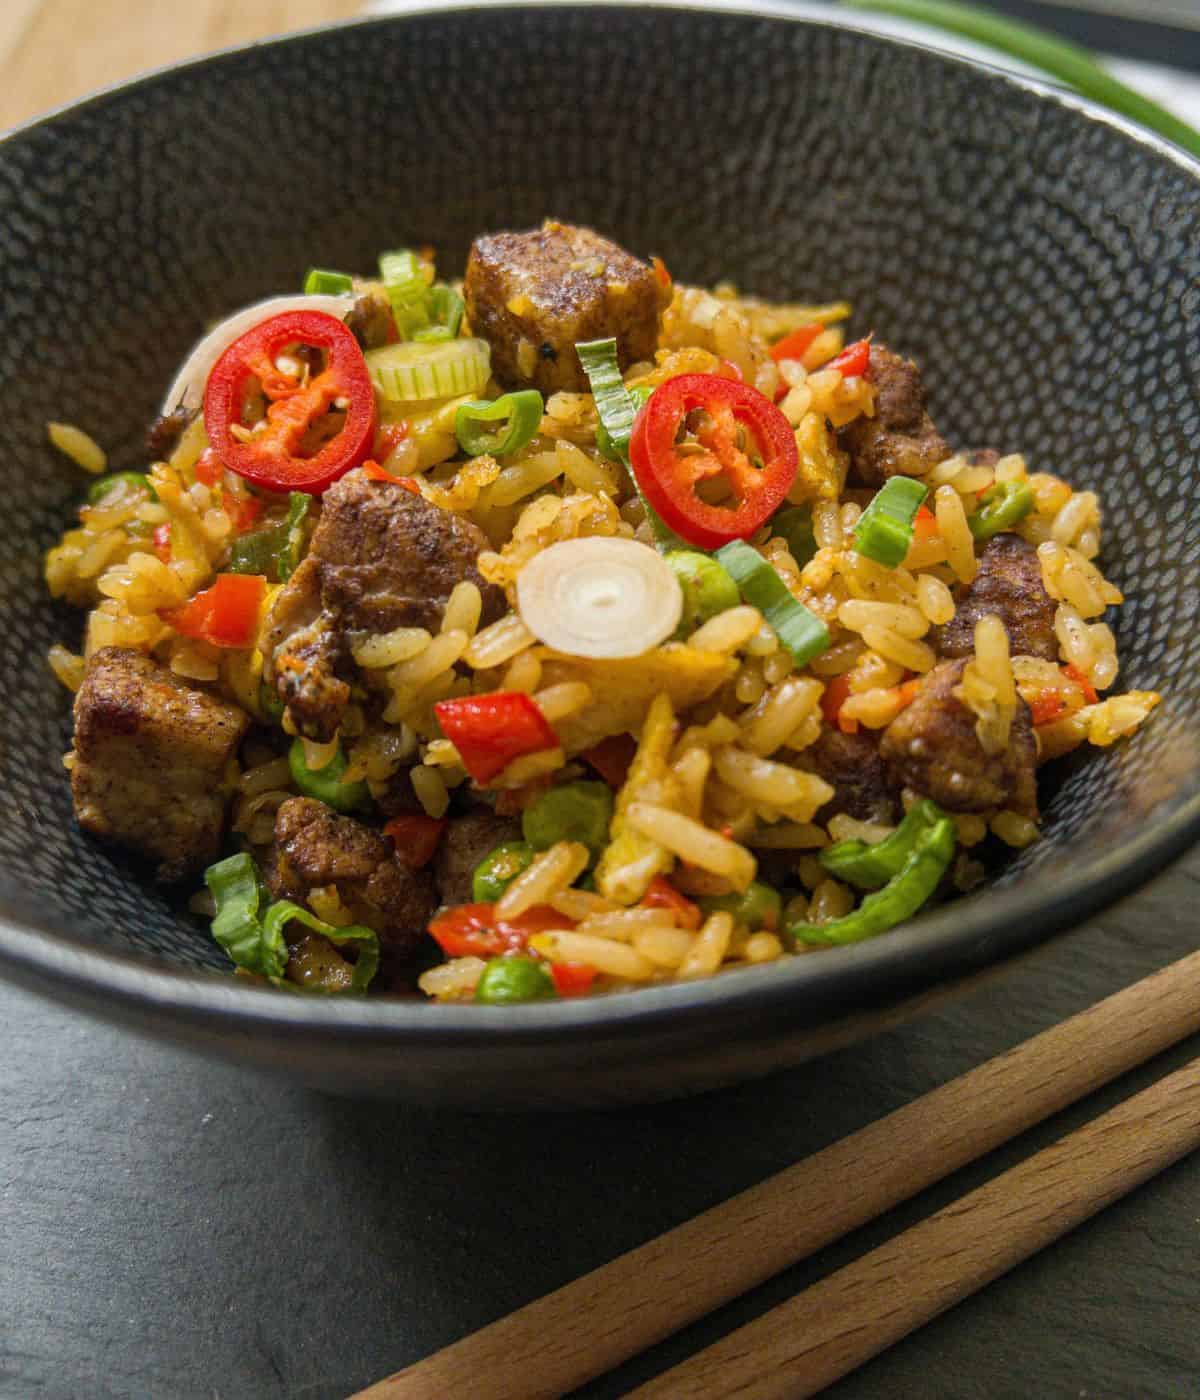 Bowl of pork belly fried rice garnished with red chilli and spring onion.